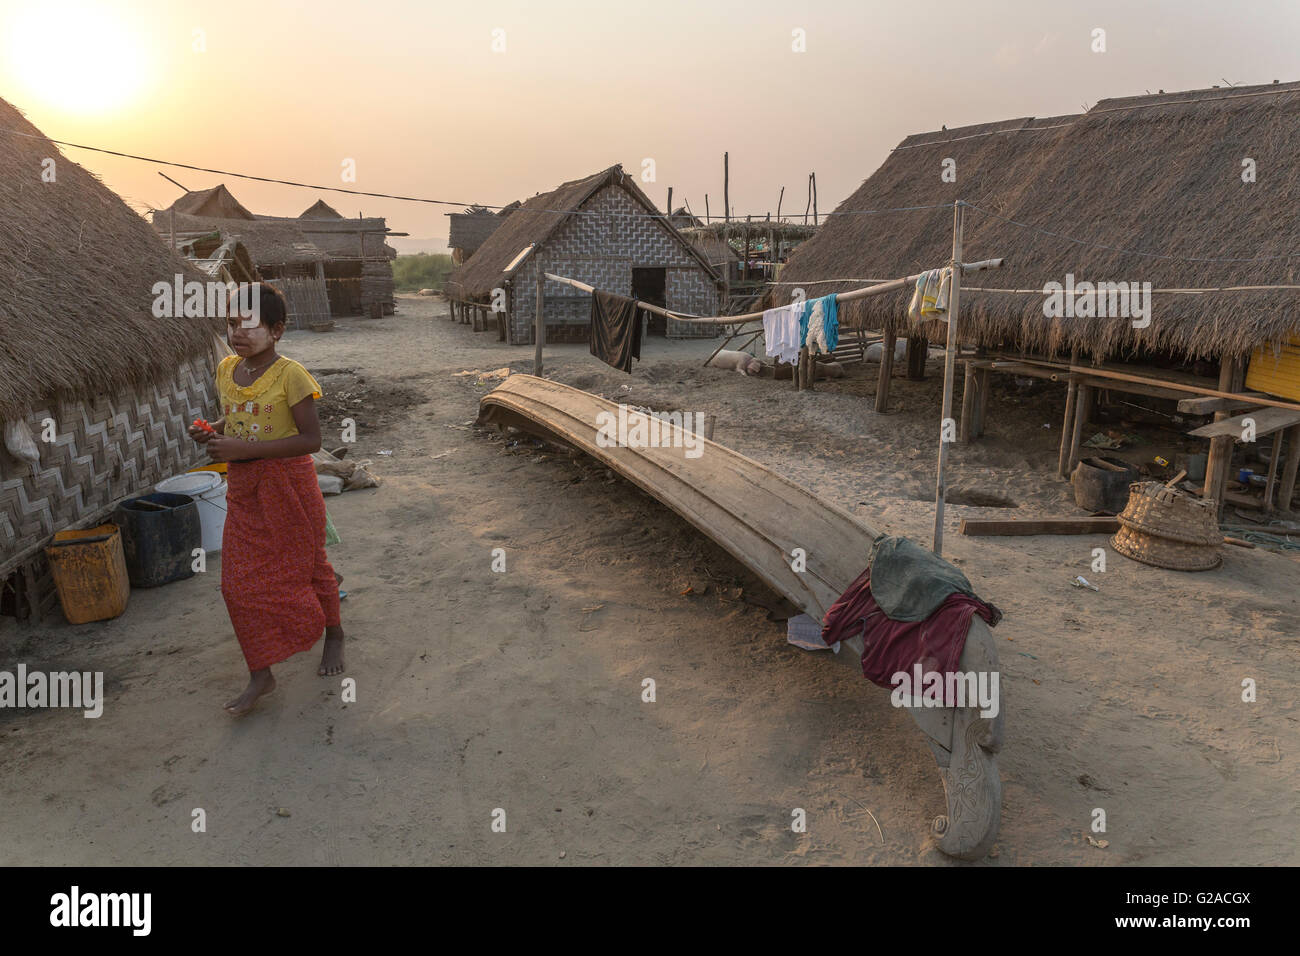 Young girl walking in a typical village, with houses and boats of fishermen, Mandalay, Myanmar, Burma, South Asia, Asia Stock Photo